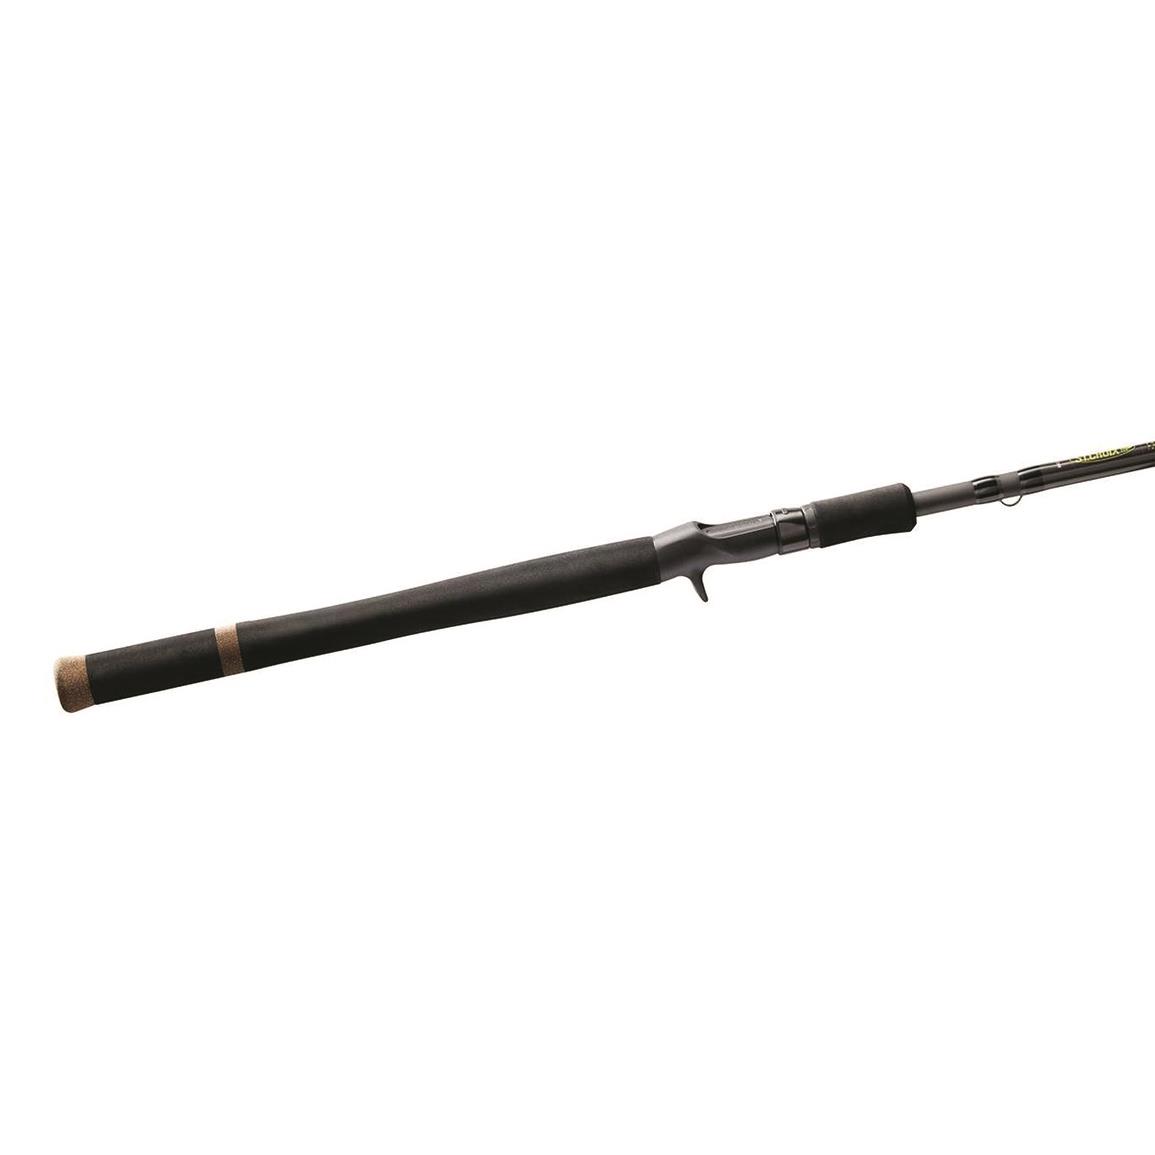 St. Croix Bass X Casting Rod, 7'10" Length, Extra Heavy Power, Fast Action